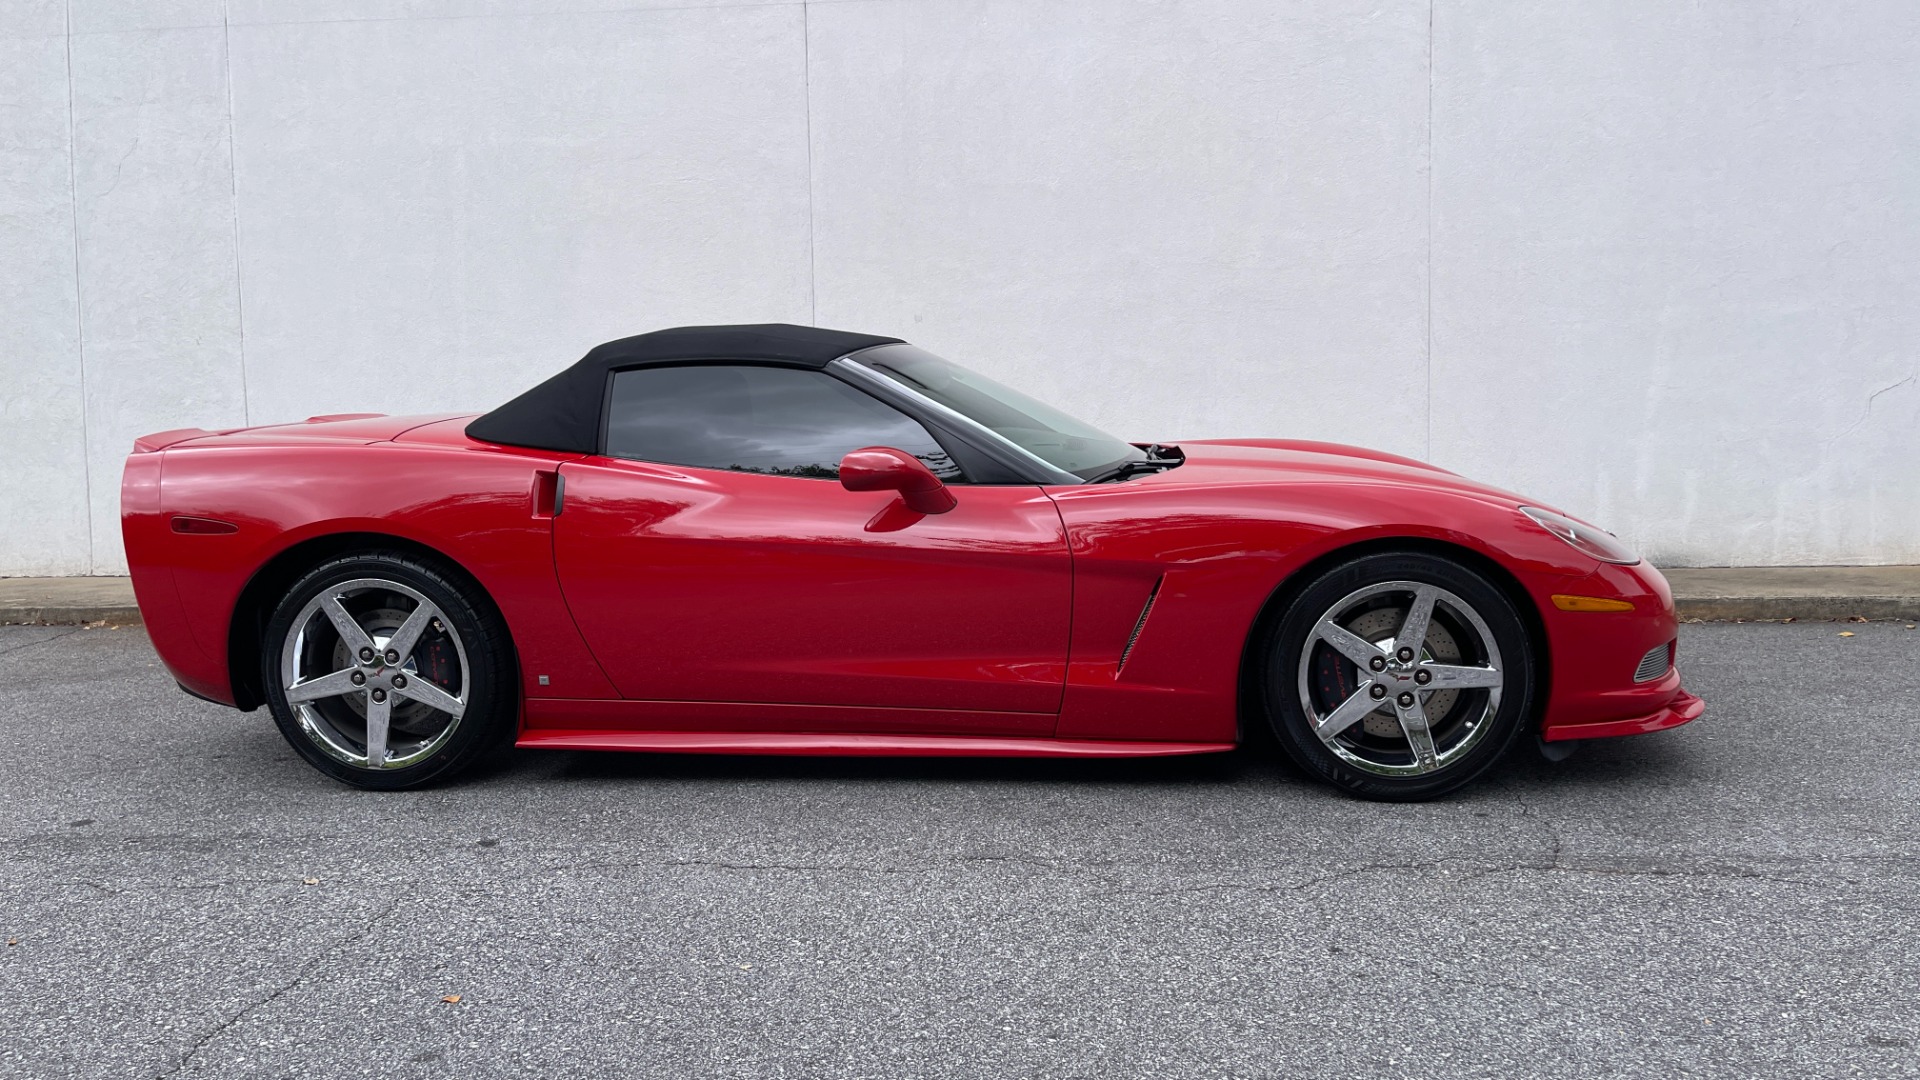 Used 2007 Chevrolet Corvette CONVERTIBLE / CORSA EXHAUST / CHROME WHEELS / LEATHER / AUTOMATIC for sale Sold at Formula Imports in Charlotte NC 28227 2